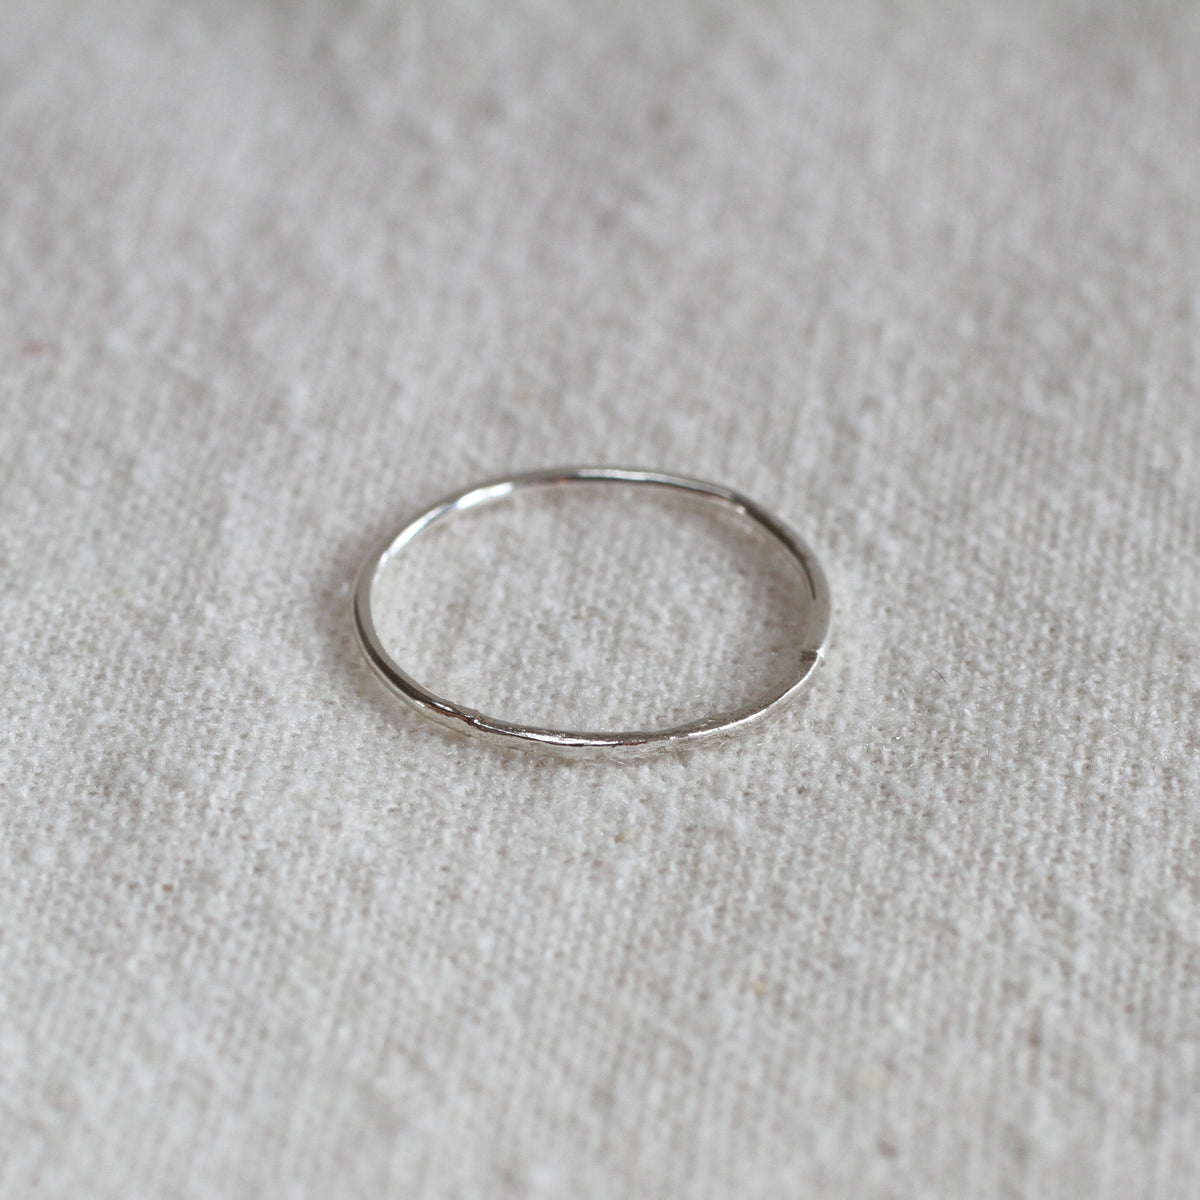 spruce needle ring – Thicket